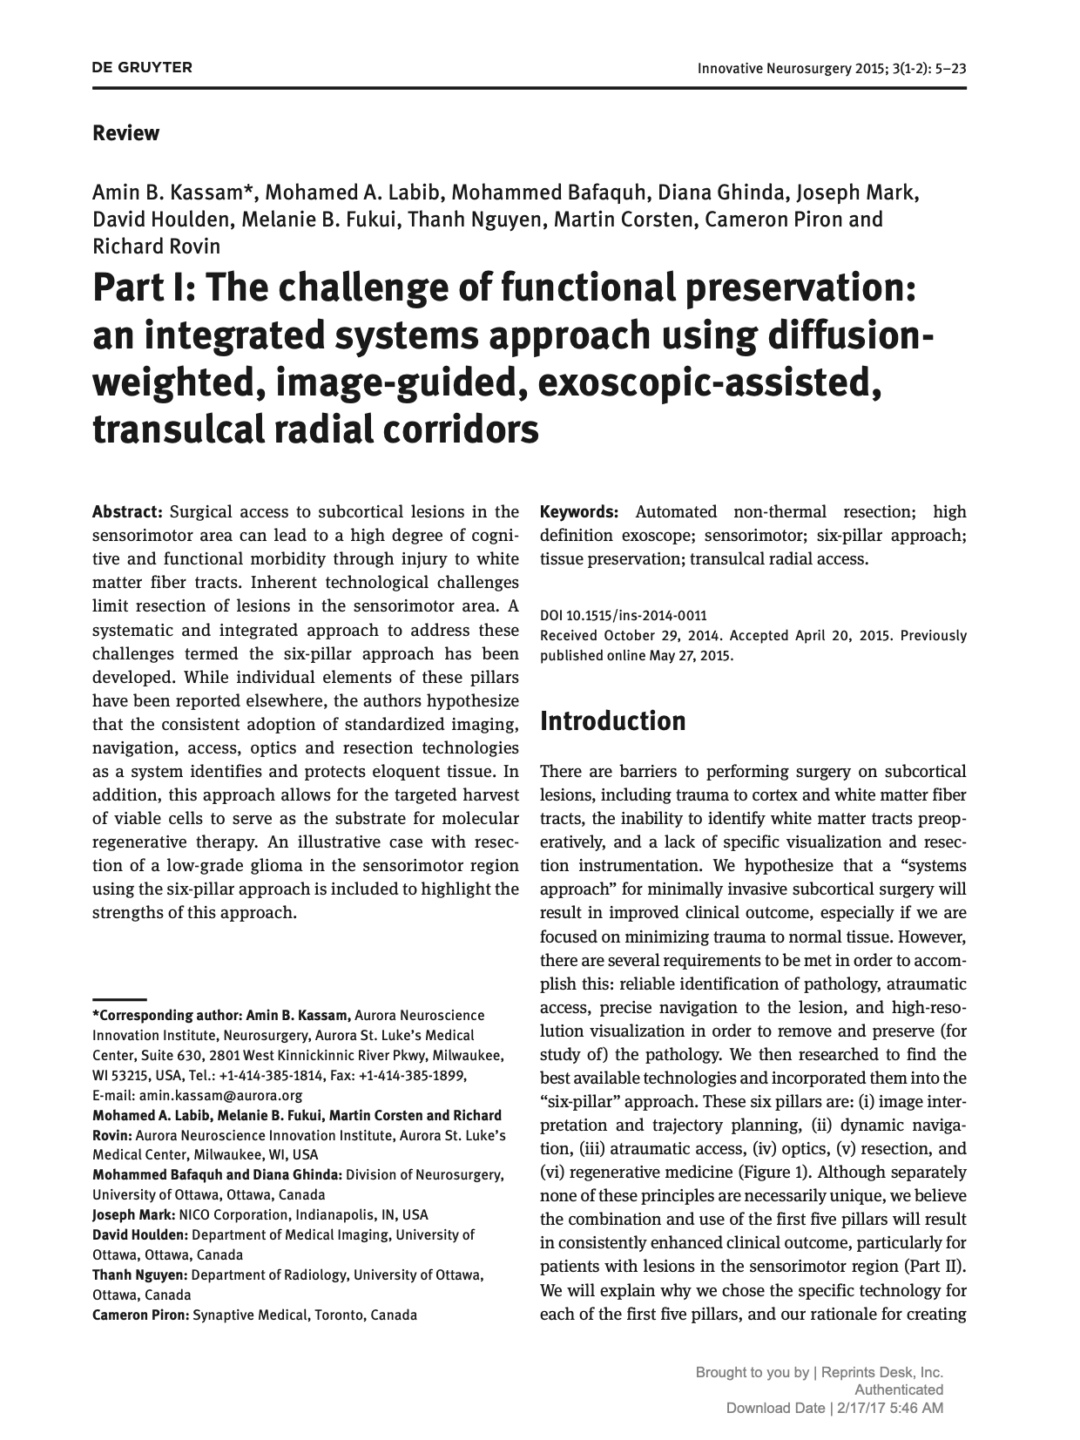 Part I: The challenge of functional preservation: an integrated systems approach using diffusion- weighted, image-guided, exoscopic-assisted, transulcal radial corridors